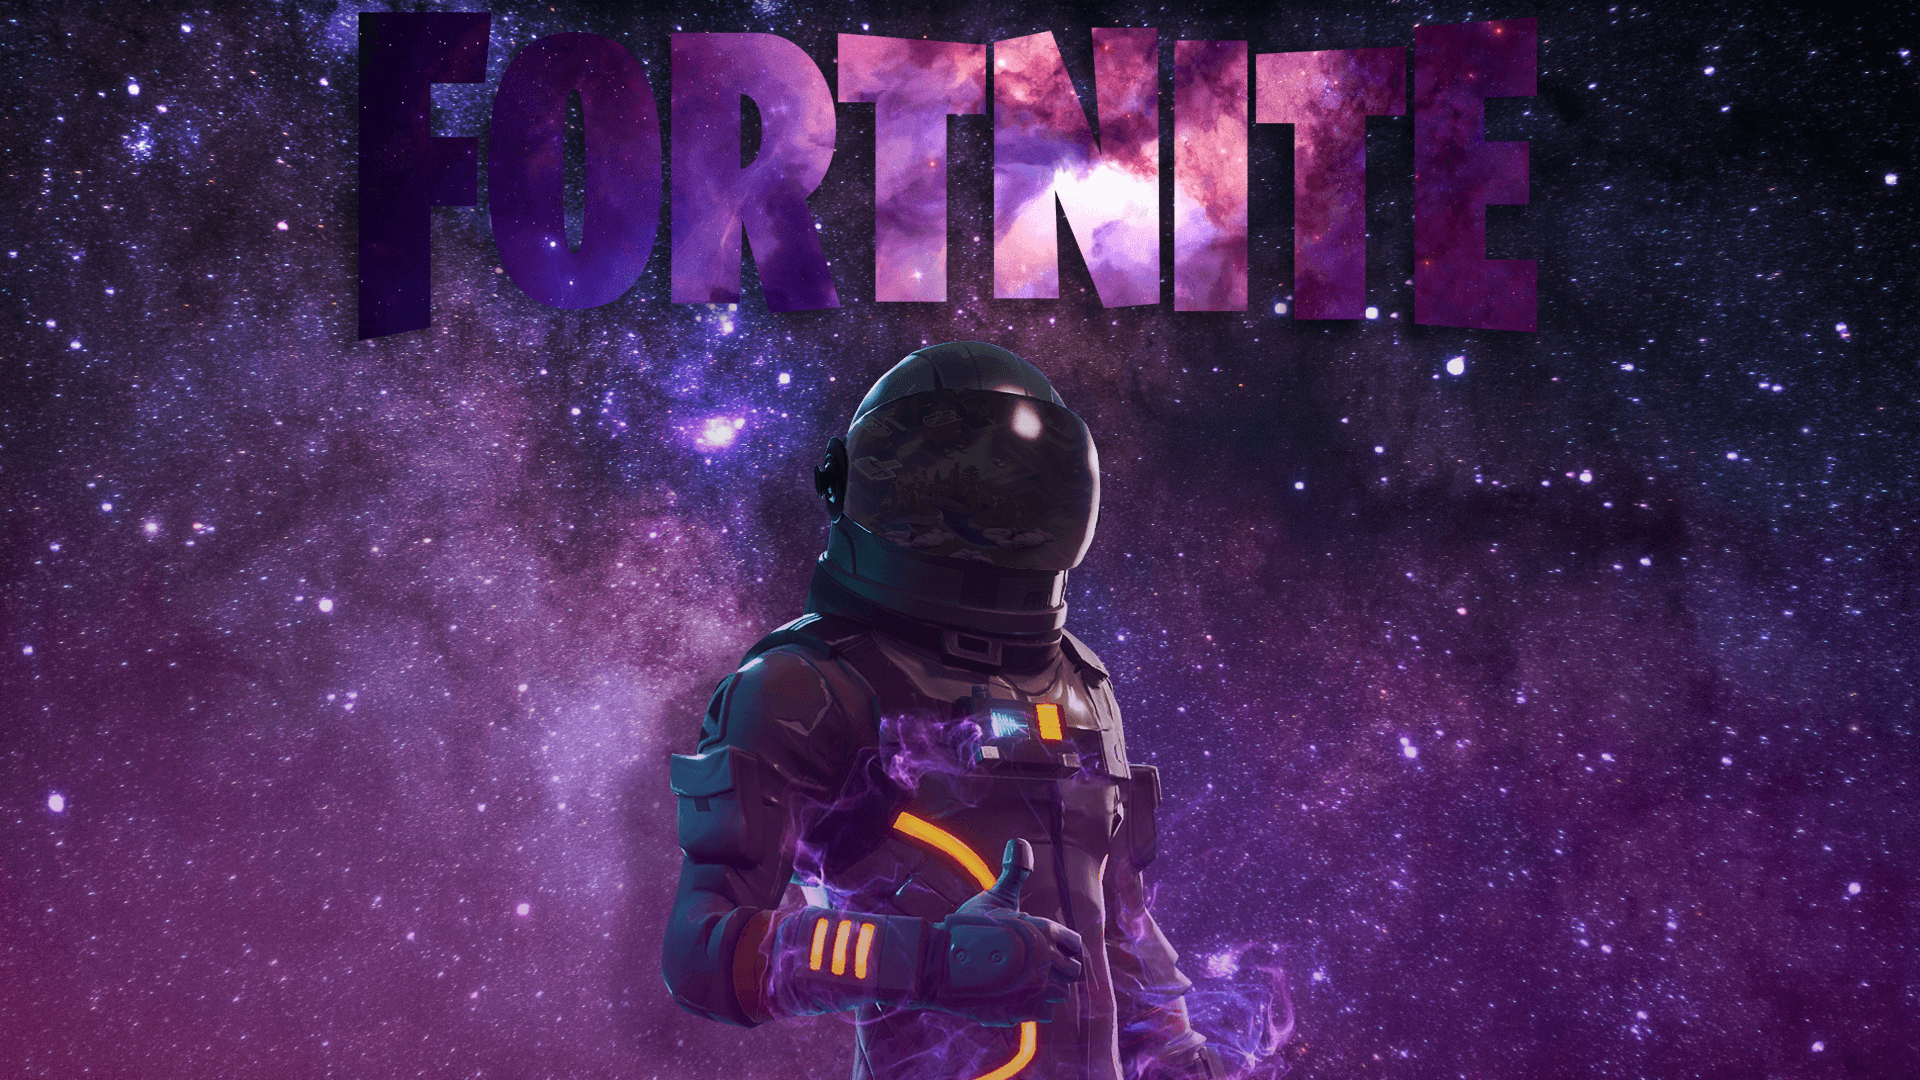 Download wallpapers Fortnite logo purple glitter logo emblem creative  art popular games purple metal texture Fortnite logo for desktop with  resolution 2560x1600 High Quality HD pictures wallpapers